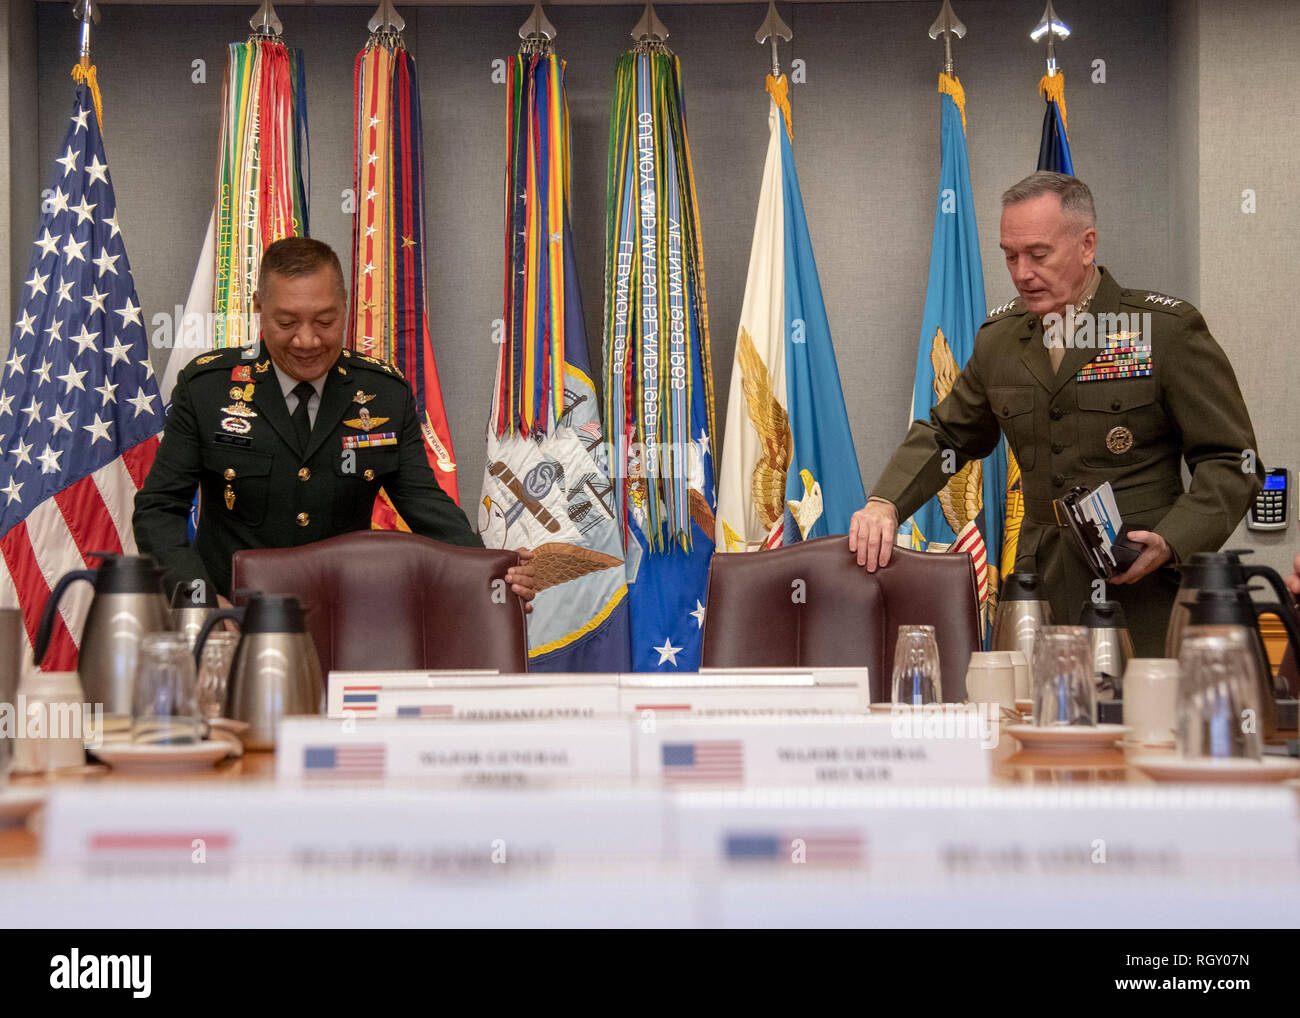 Marine Corps Gen. Joe Dunford, chairman of the Joint Chiefs of Staff, hosts his counterpart Chief of Defence of the Royal Thai Armed Forces Gen. Pornpipat Benyasri at the Pentagon, Jan. 29, 2019. DoD Photo by Navy Petty Officer 1st Class Dominique A. Pineiro Stock Photo